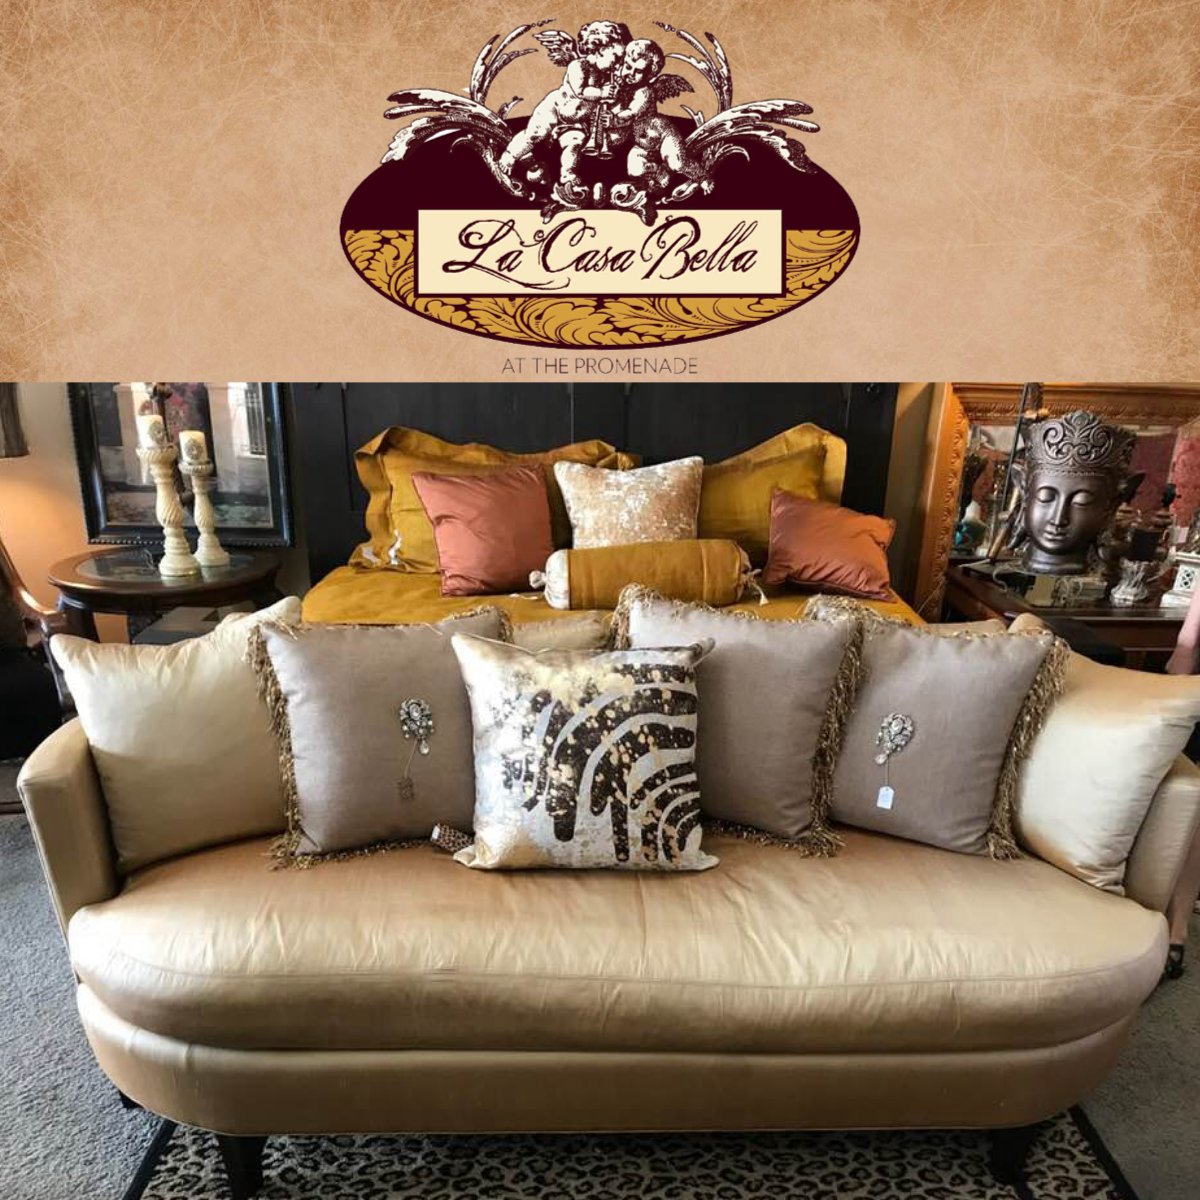 Happiness is a day on the couch!
#LaCasaBellaABQ  #HomeConsignment #FurnitureConsignment #InteriorDesign